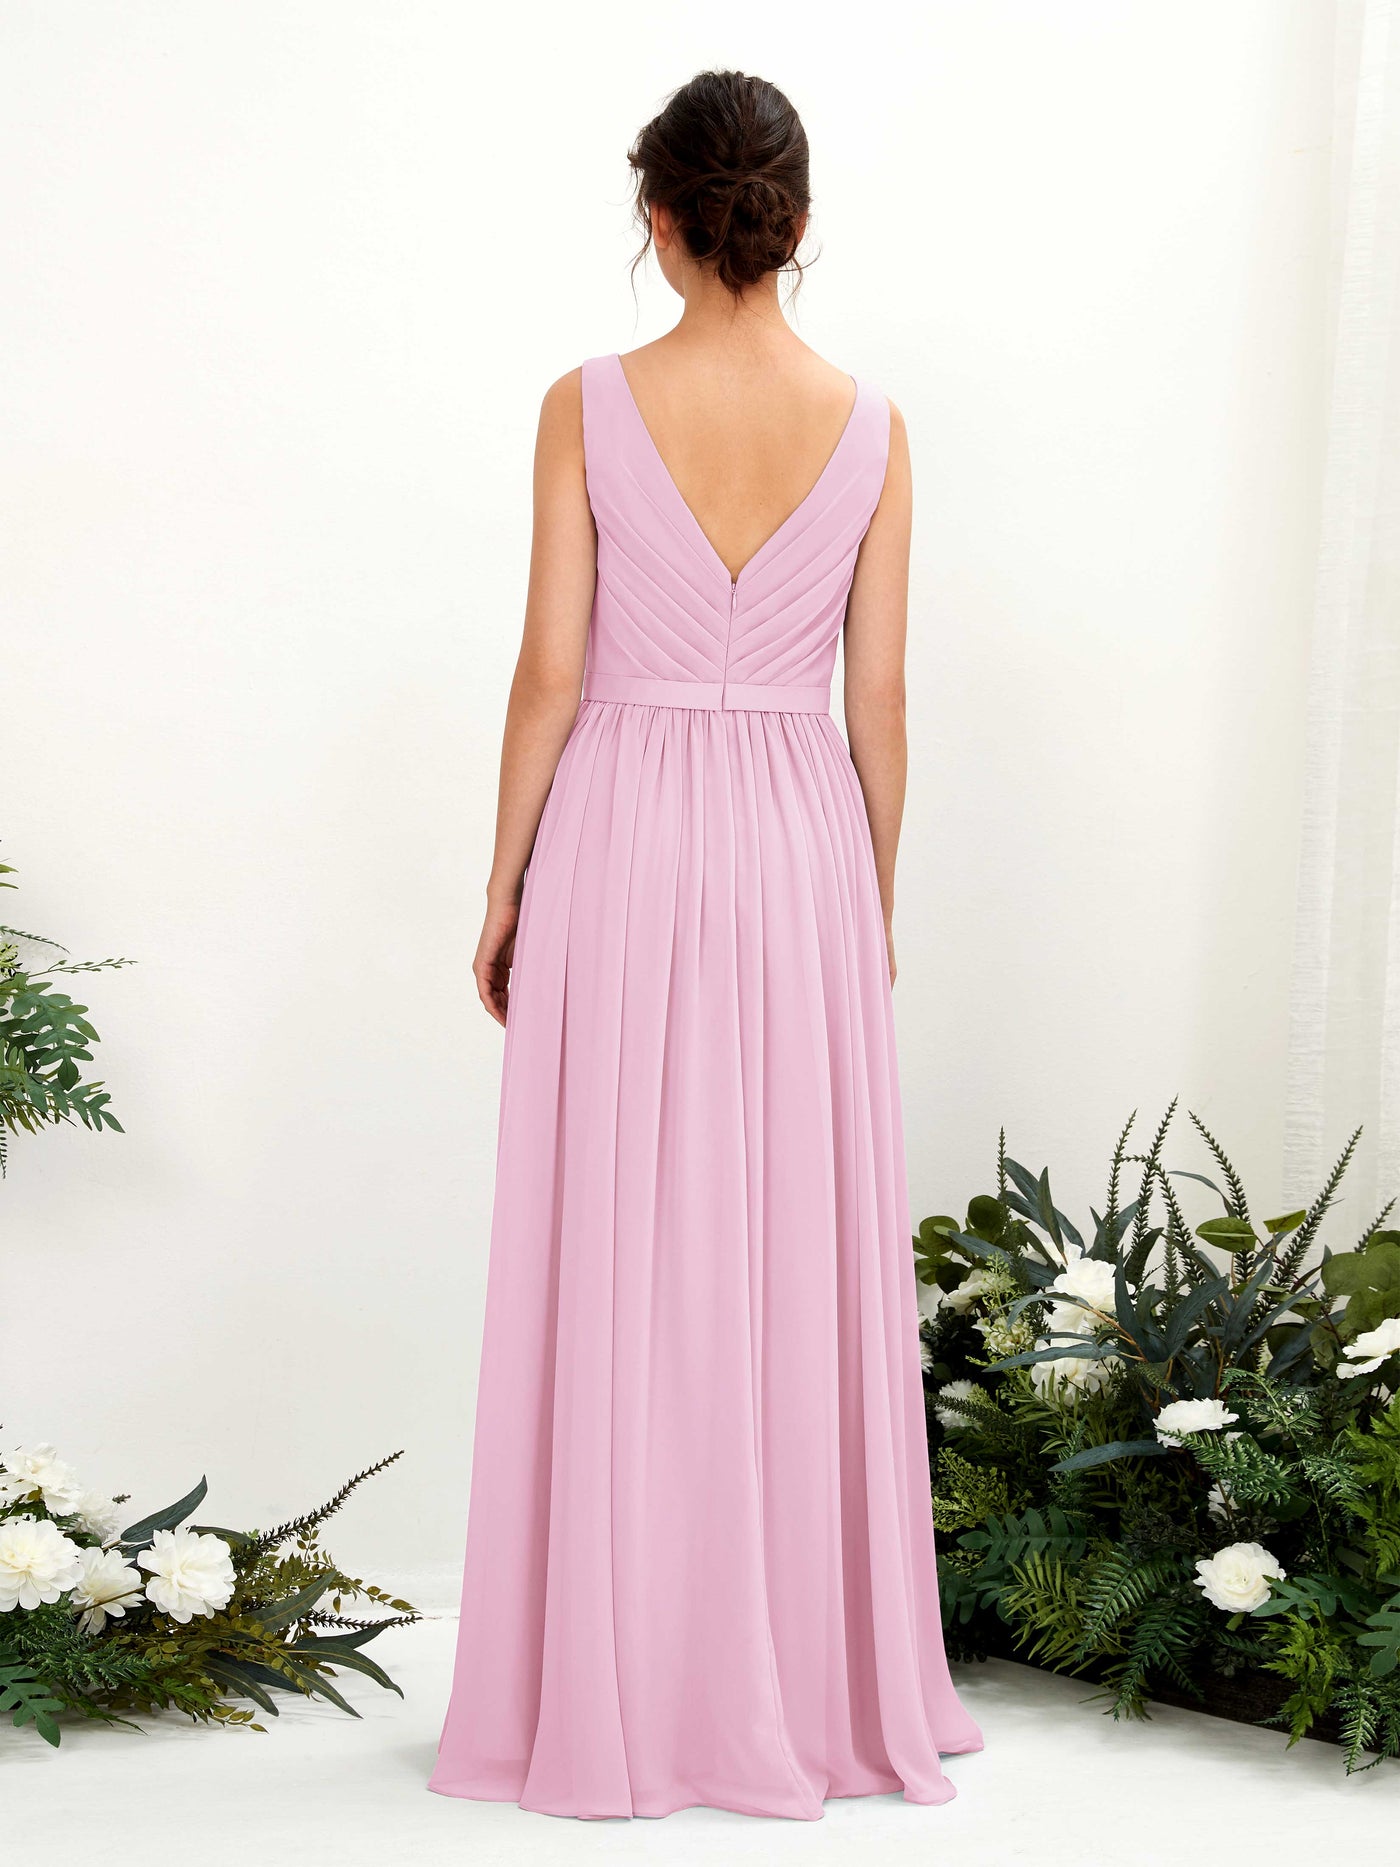 Candy Pink Bridesmaid Dresses Bridesmaid Dress A-line Chiffon V-neck Full Length Sleeveless Wedding Party Dress (81223639)#color_candy-pink